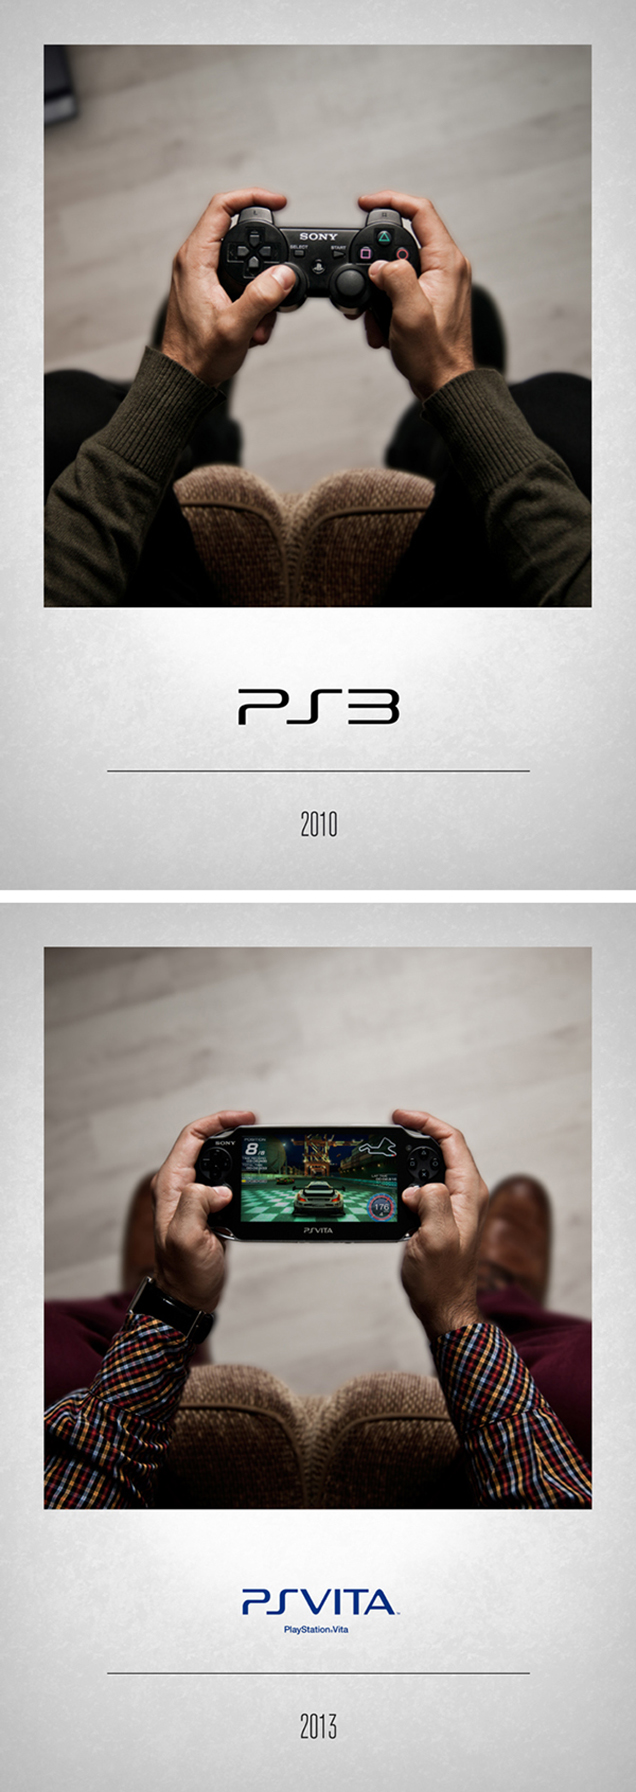 The Evolution Of Video Game Controllers In 16 Cool Photos